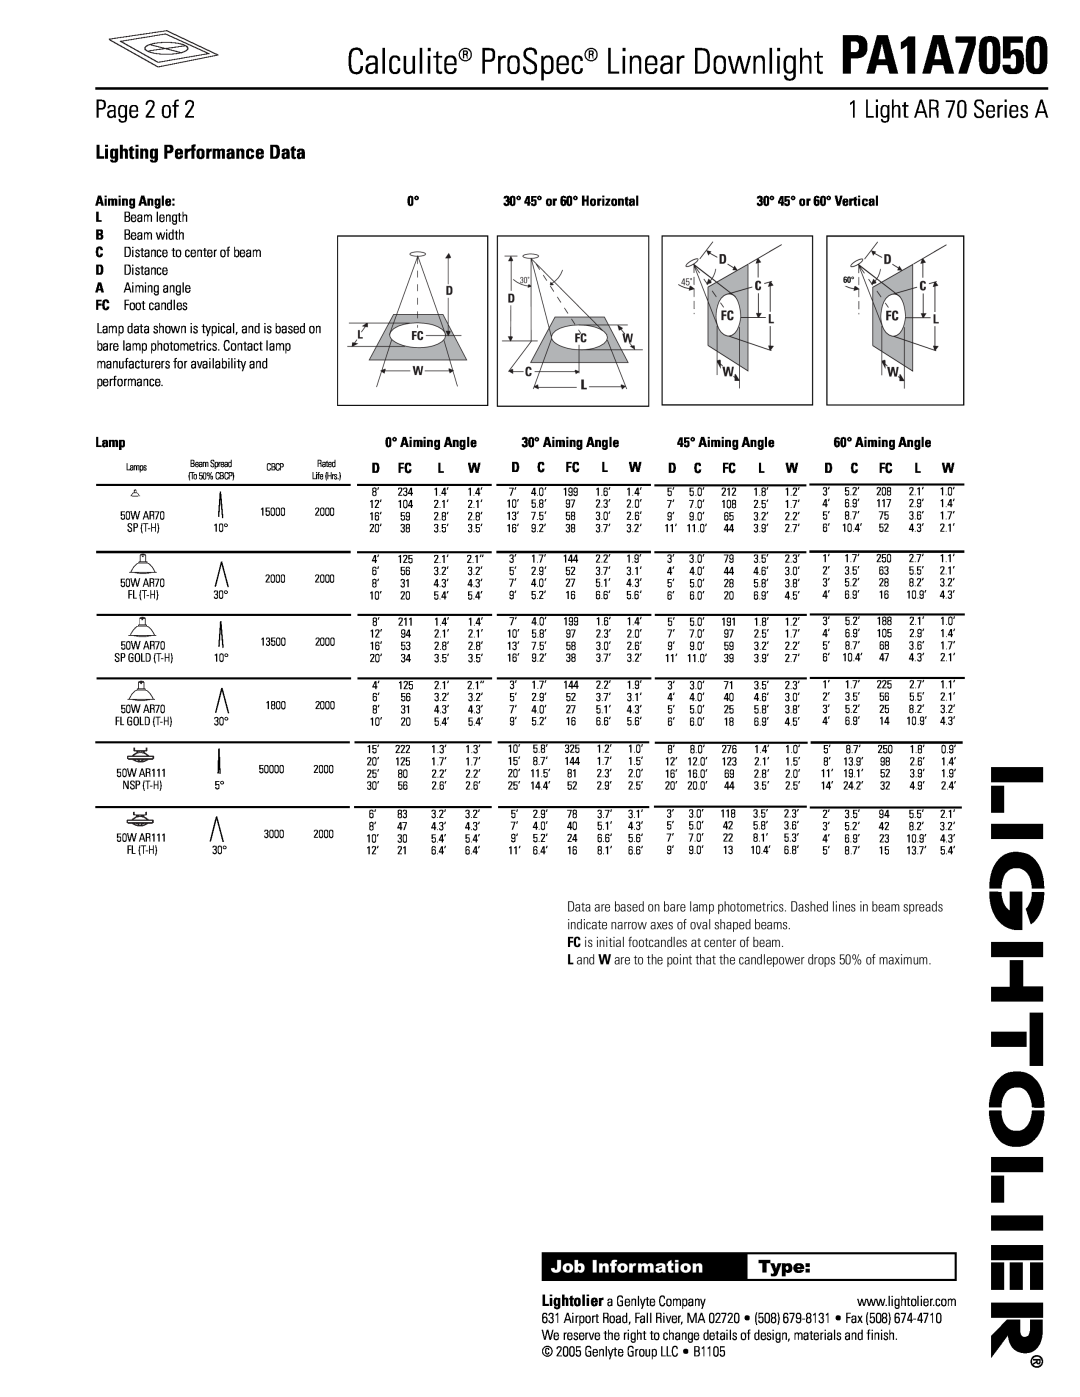 Lightolier PA1A7050 Page 2 of, Lighting Performance Data, Aiming Angle, 30 45 or 60 Horizontal, Lamp, D Fc L W, D C Fc L W 